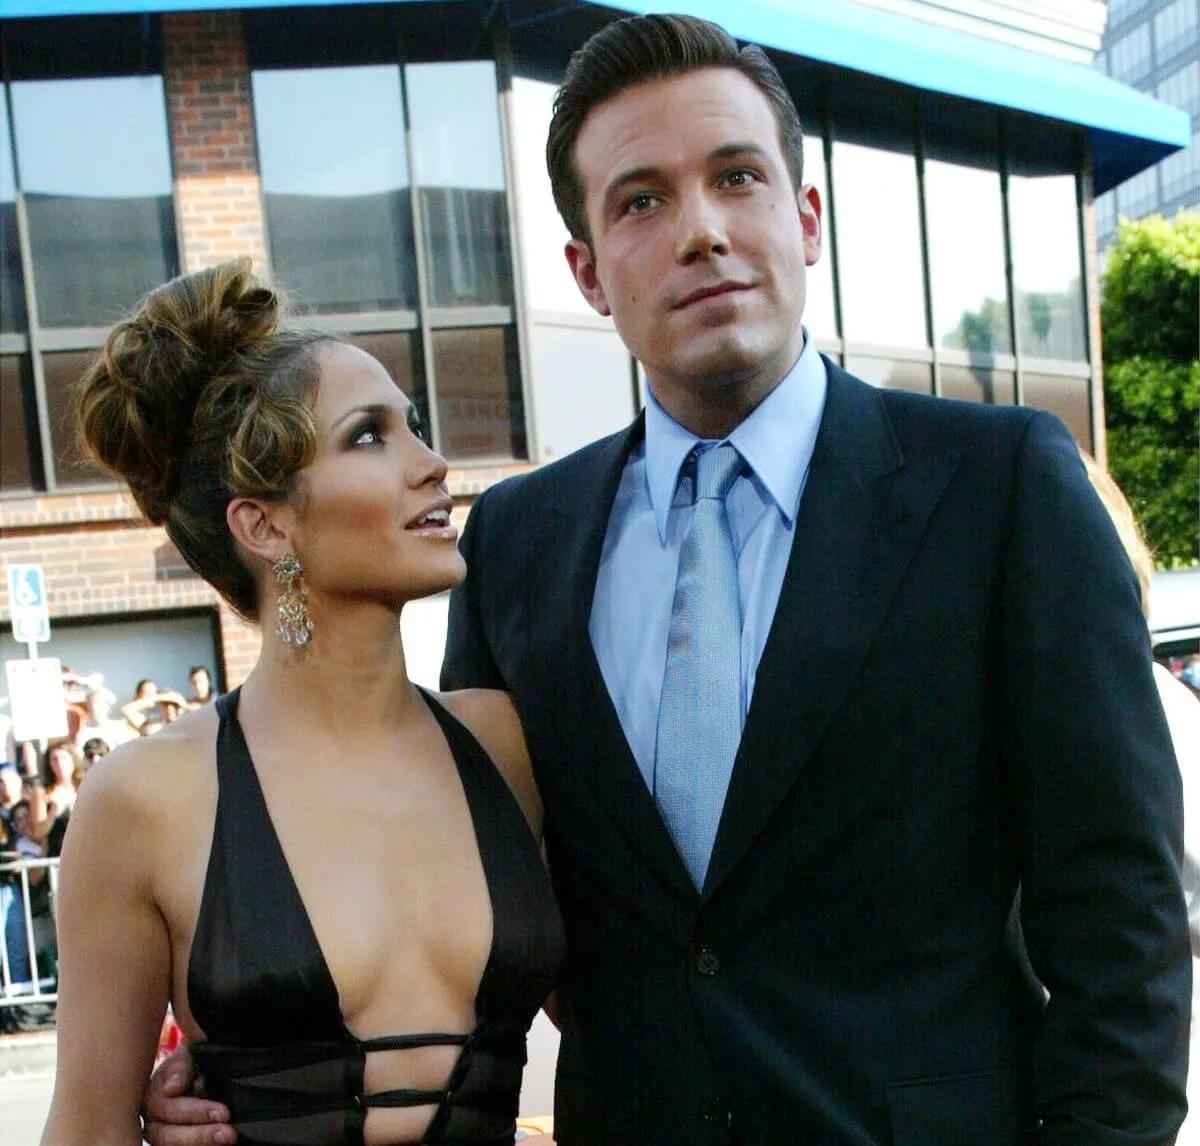 Ben Affleck stands with his arm around Jennifer Lopez. She looks up at him. He wears a suit and she wears a black dress.